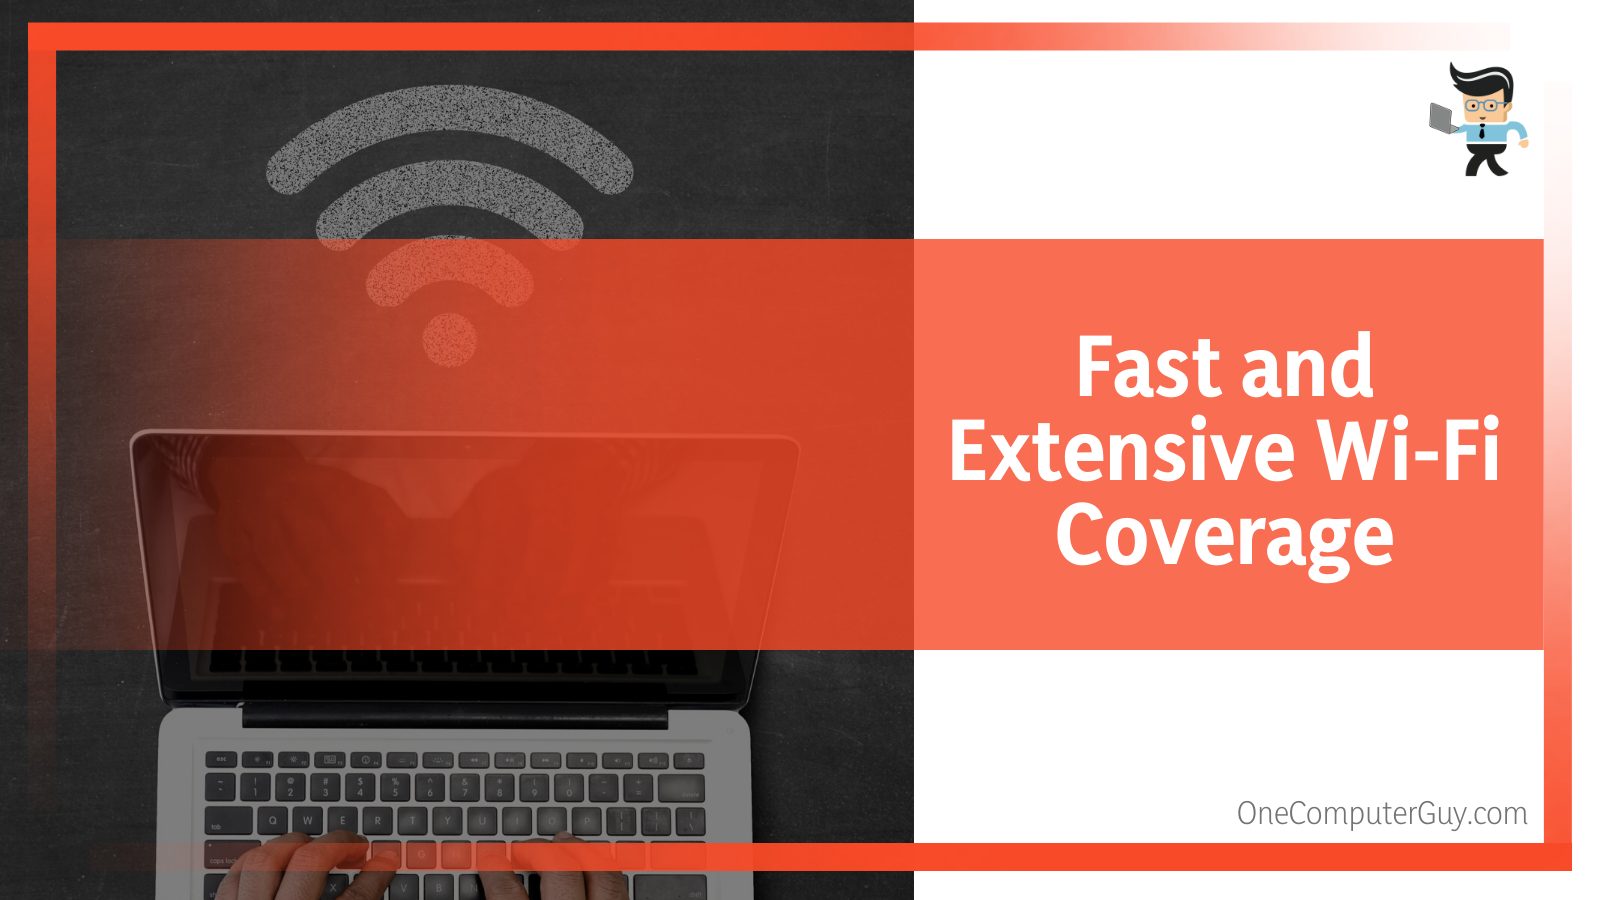 Fast and Extensive Wi-Fi Coverage